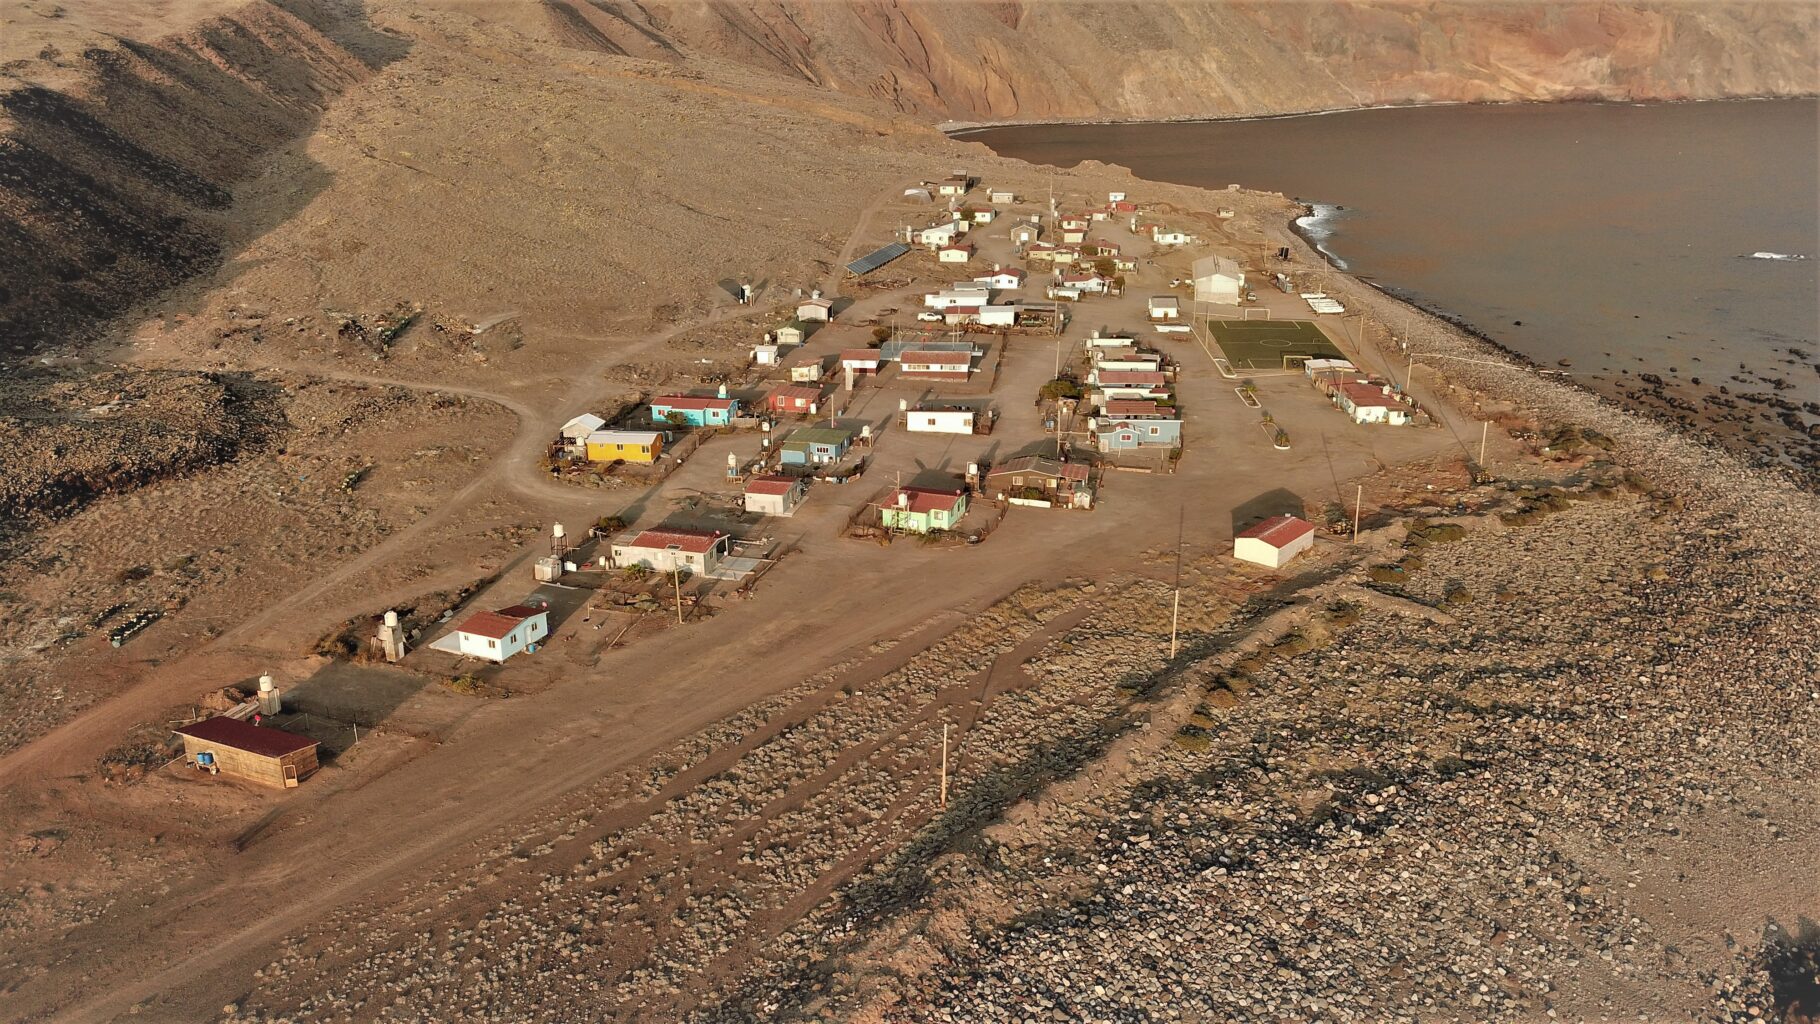 Overhead view of village